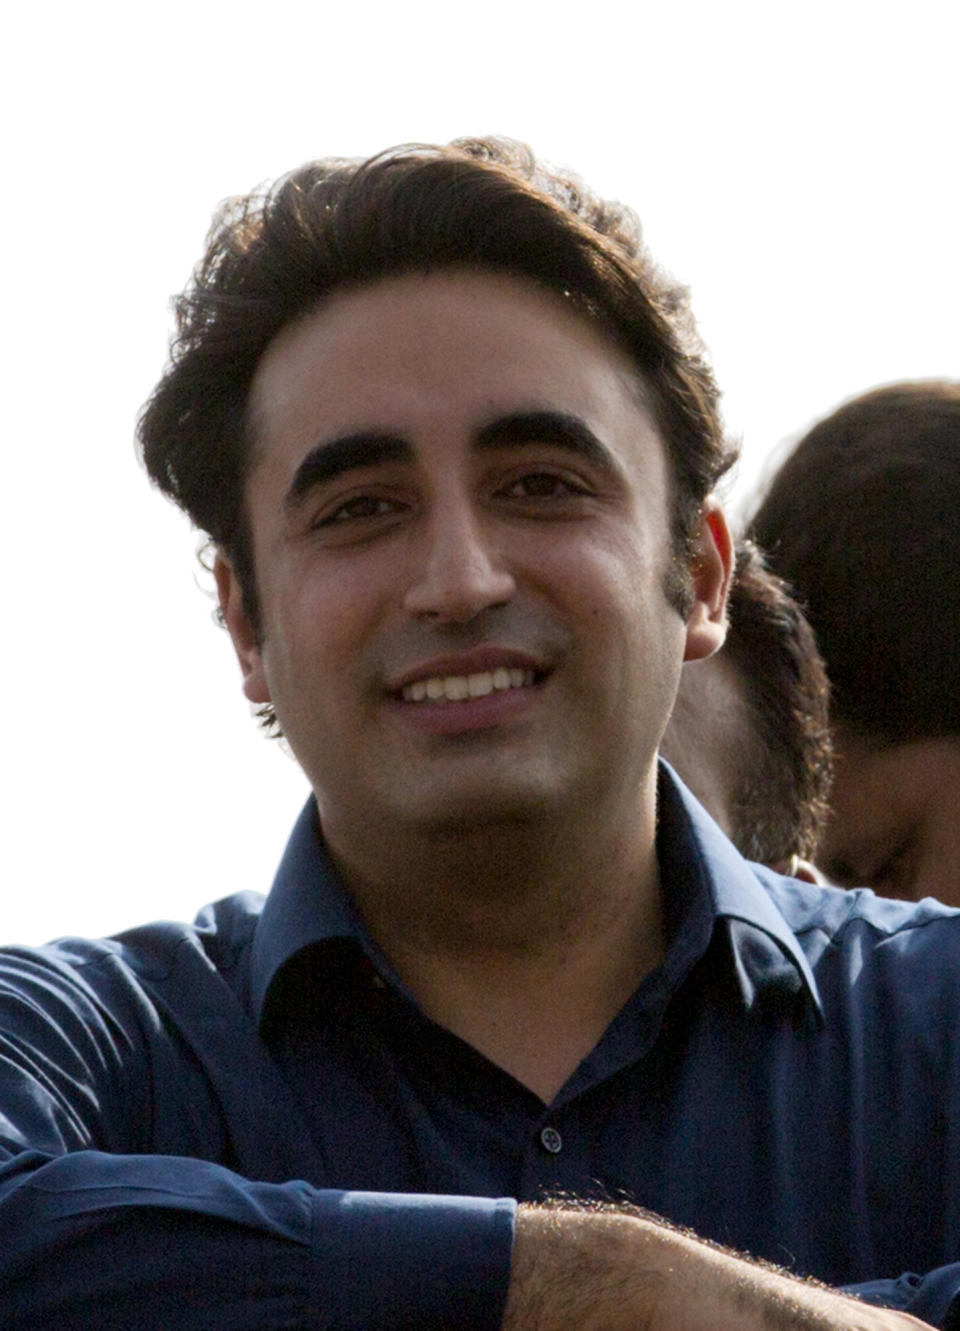 In this photo taken on Sept. 25, 2017 in Islamabad, Pakistan, 29-year-old Bilawal Bhutto Zardari is the son of slain former Prime Minister Benazir Bhutto. His Pakistan People's Party's political strength lies in southern Sindh province. Since the death of his mother in 2007 by militants, the party's fortunes have dwindled. Benazir Bhutto served as prime minister twice and had returned to Pakistan in an attempt to return to power when she was attacked and killed. Pakistan's Bhutto family has been dogged by tragedy.Pakistan's parliamentary elections on July 25 will mark the second time a democratically elected government in this Islamic nation has been succeeded by another. (AP Photo/B.K. Bangash)